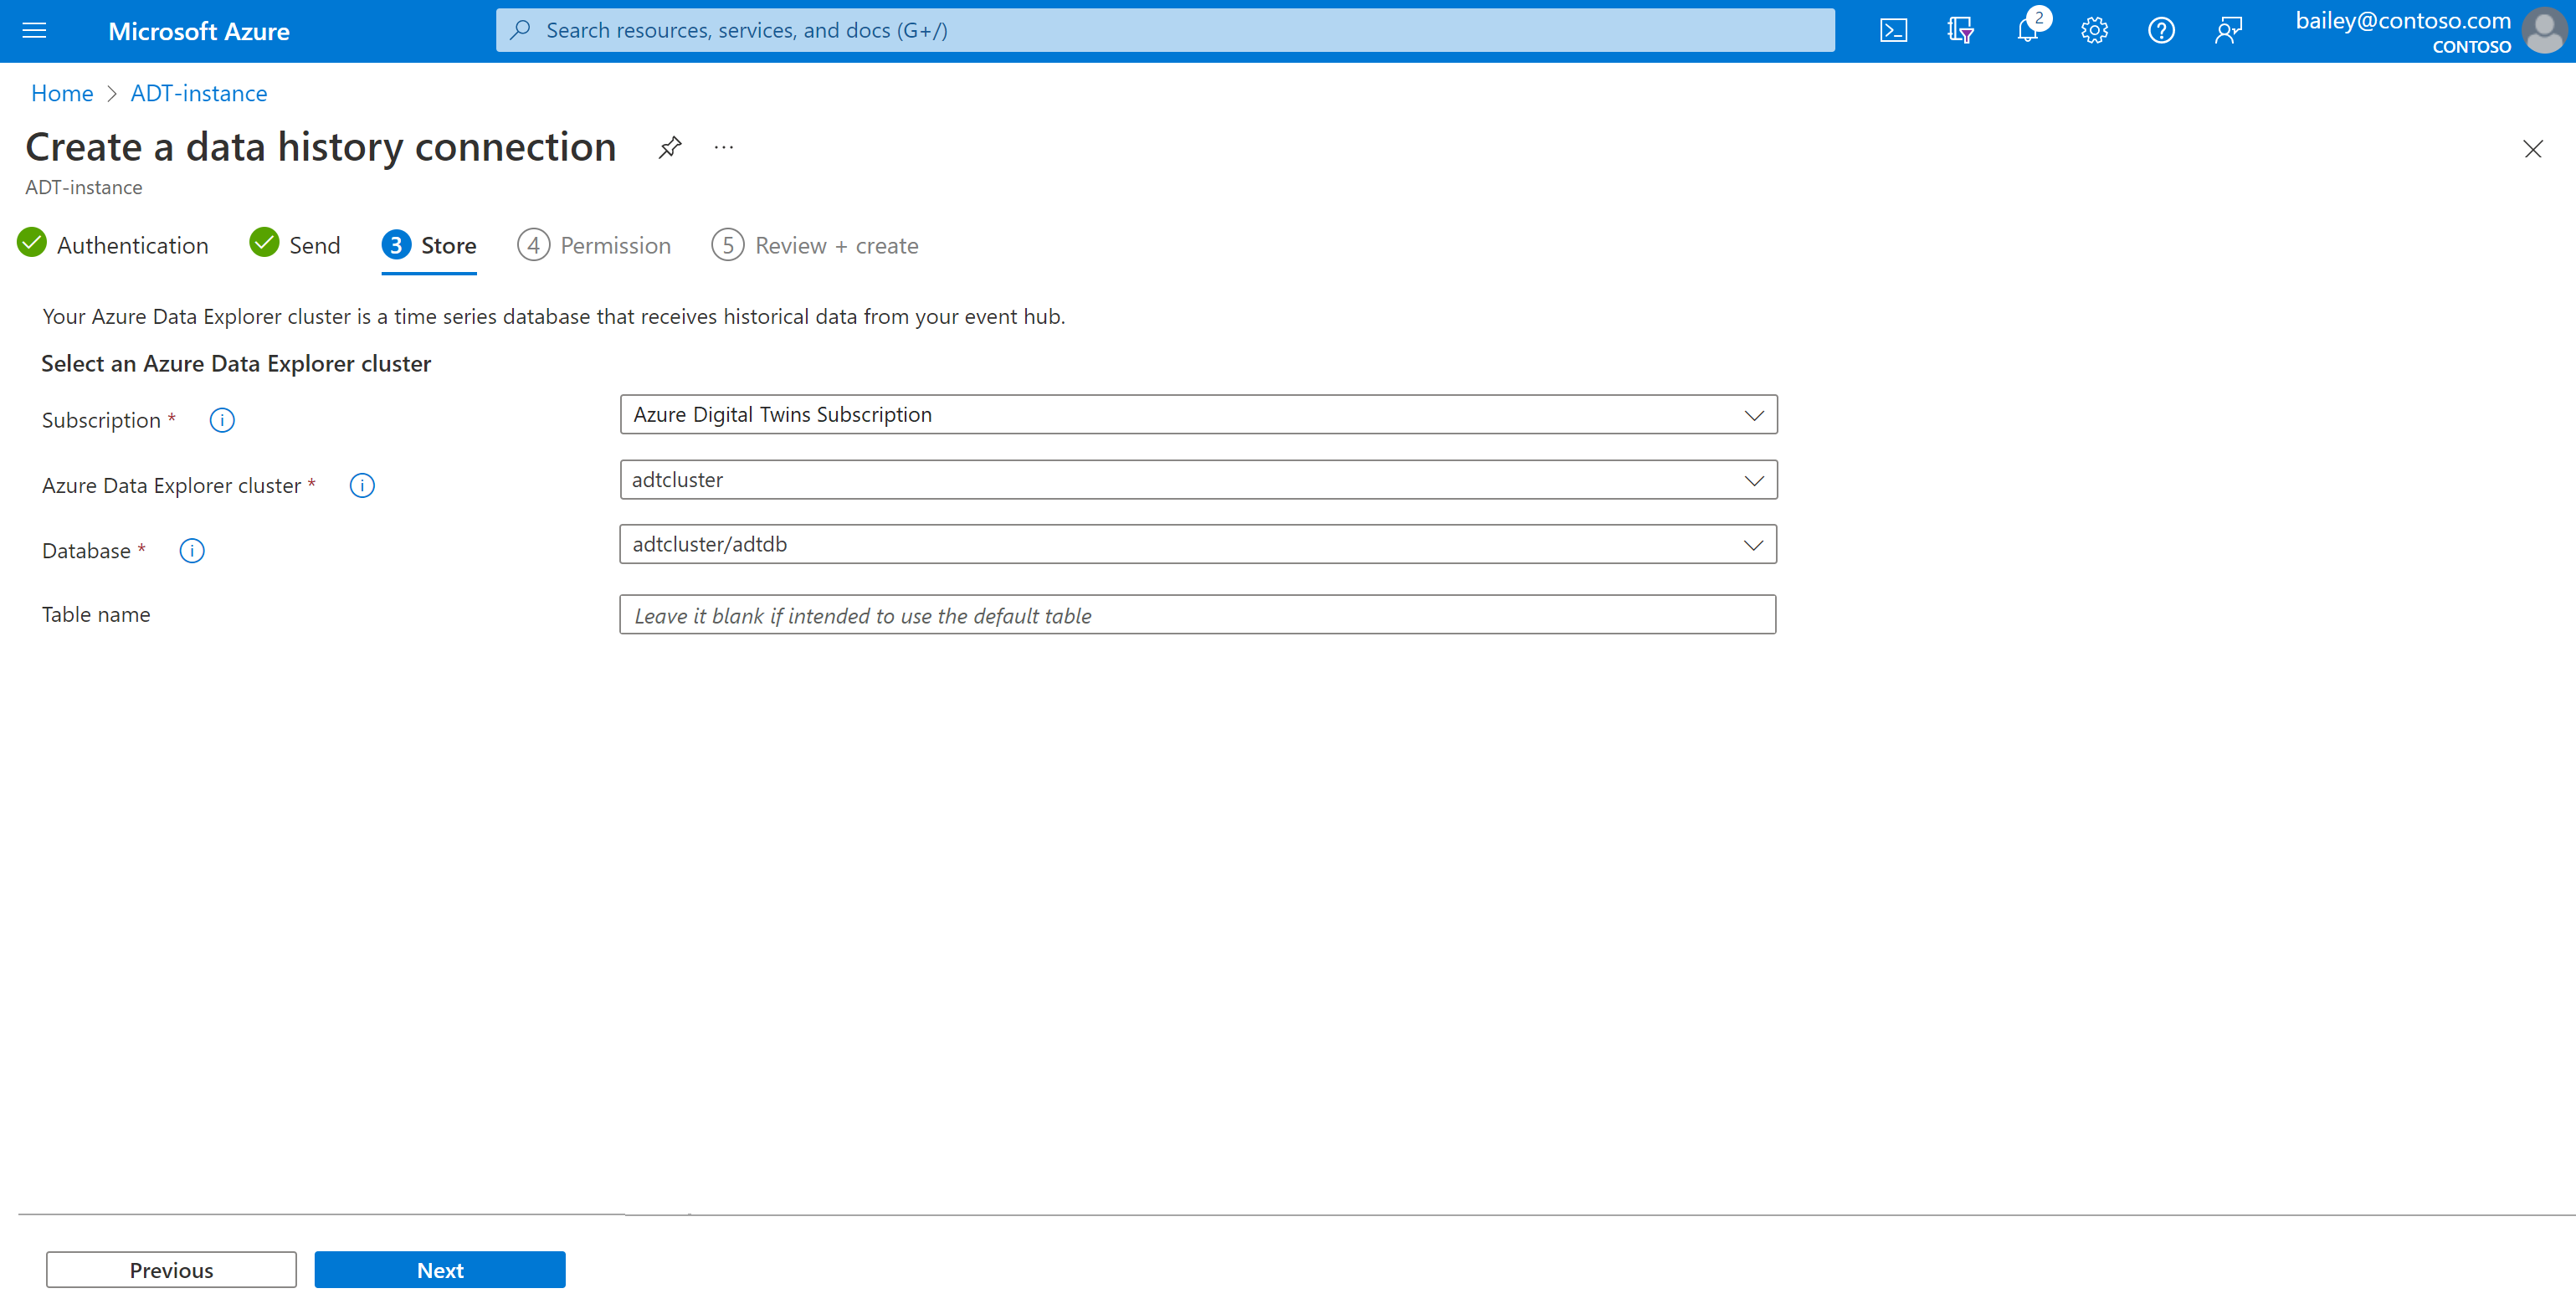 Screenshot of the Azure portal showing the Store step in the data history connection setup.